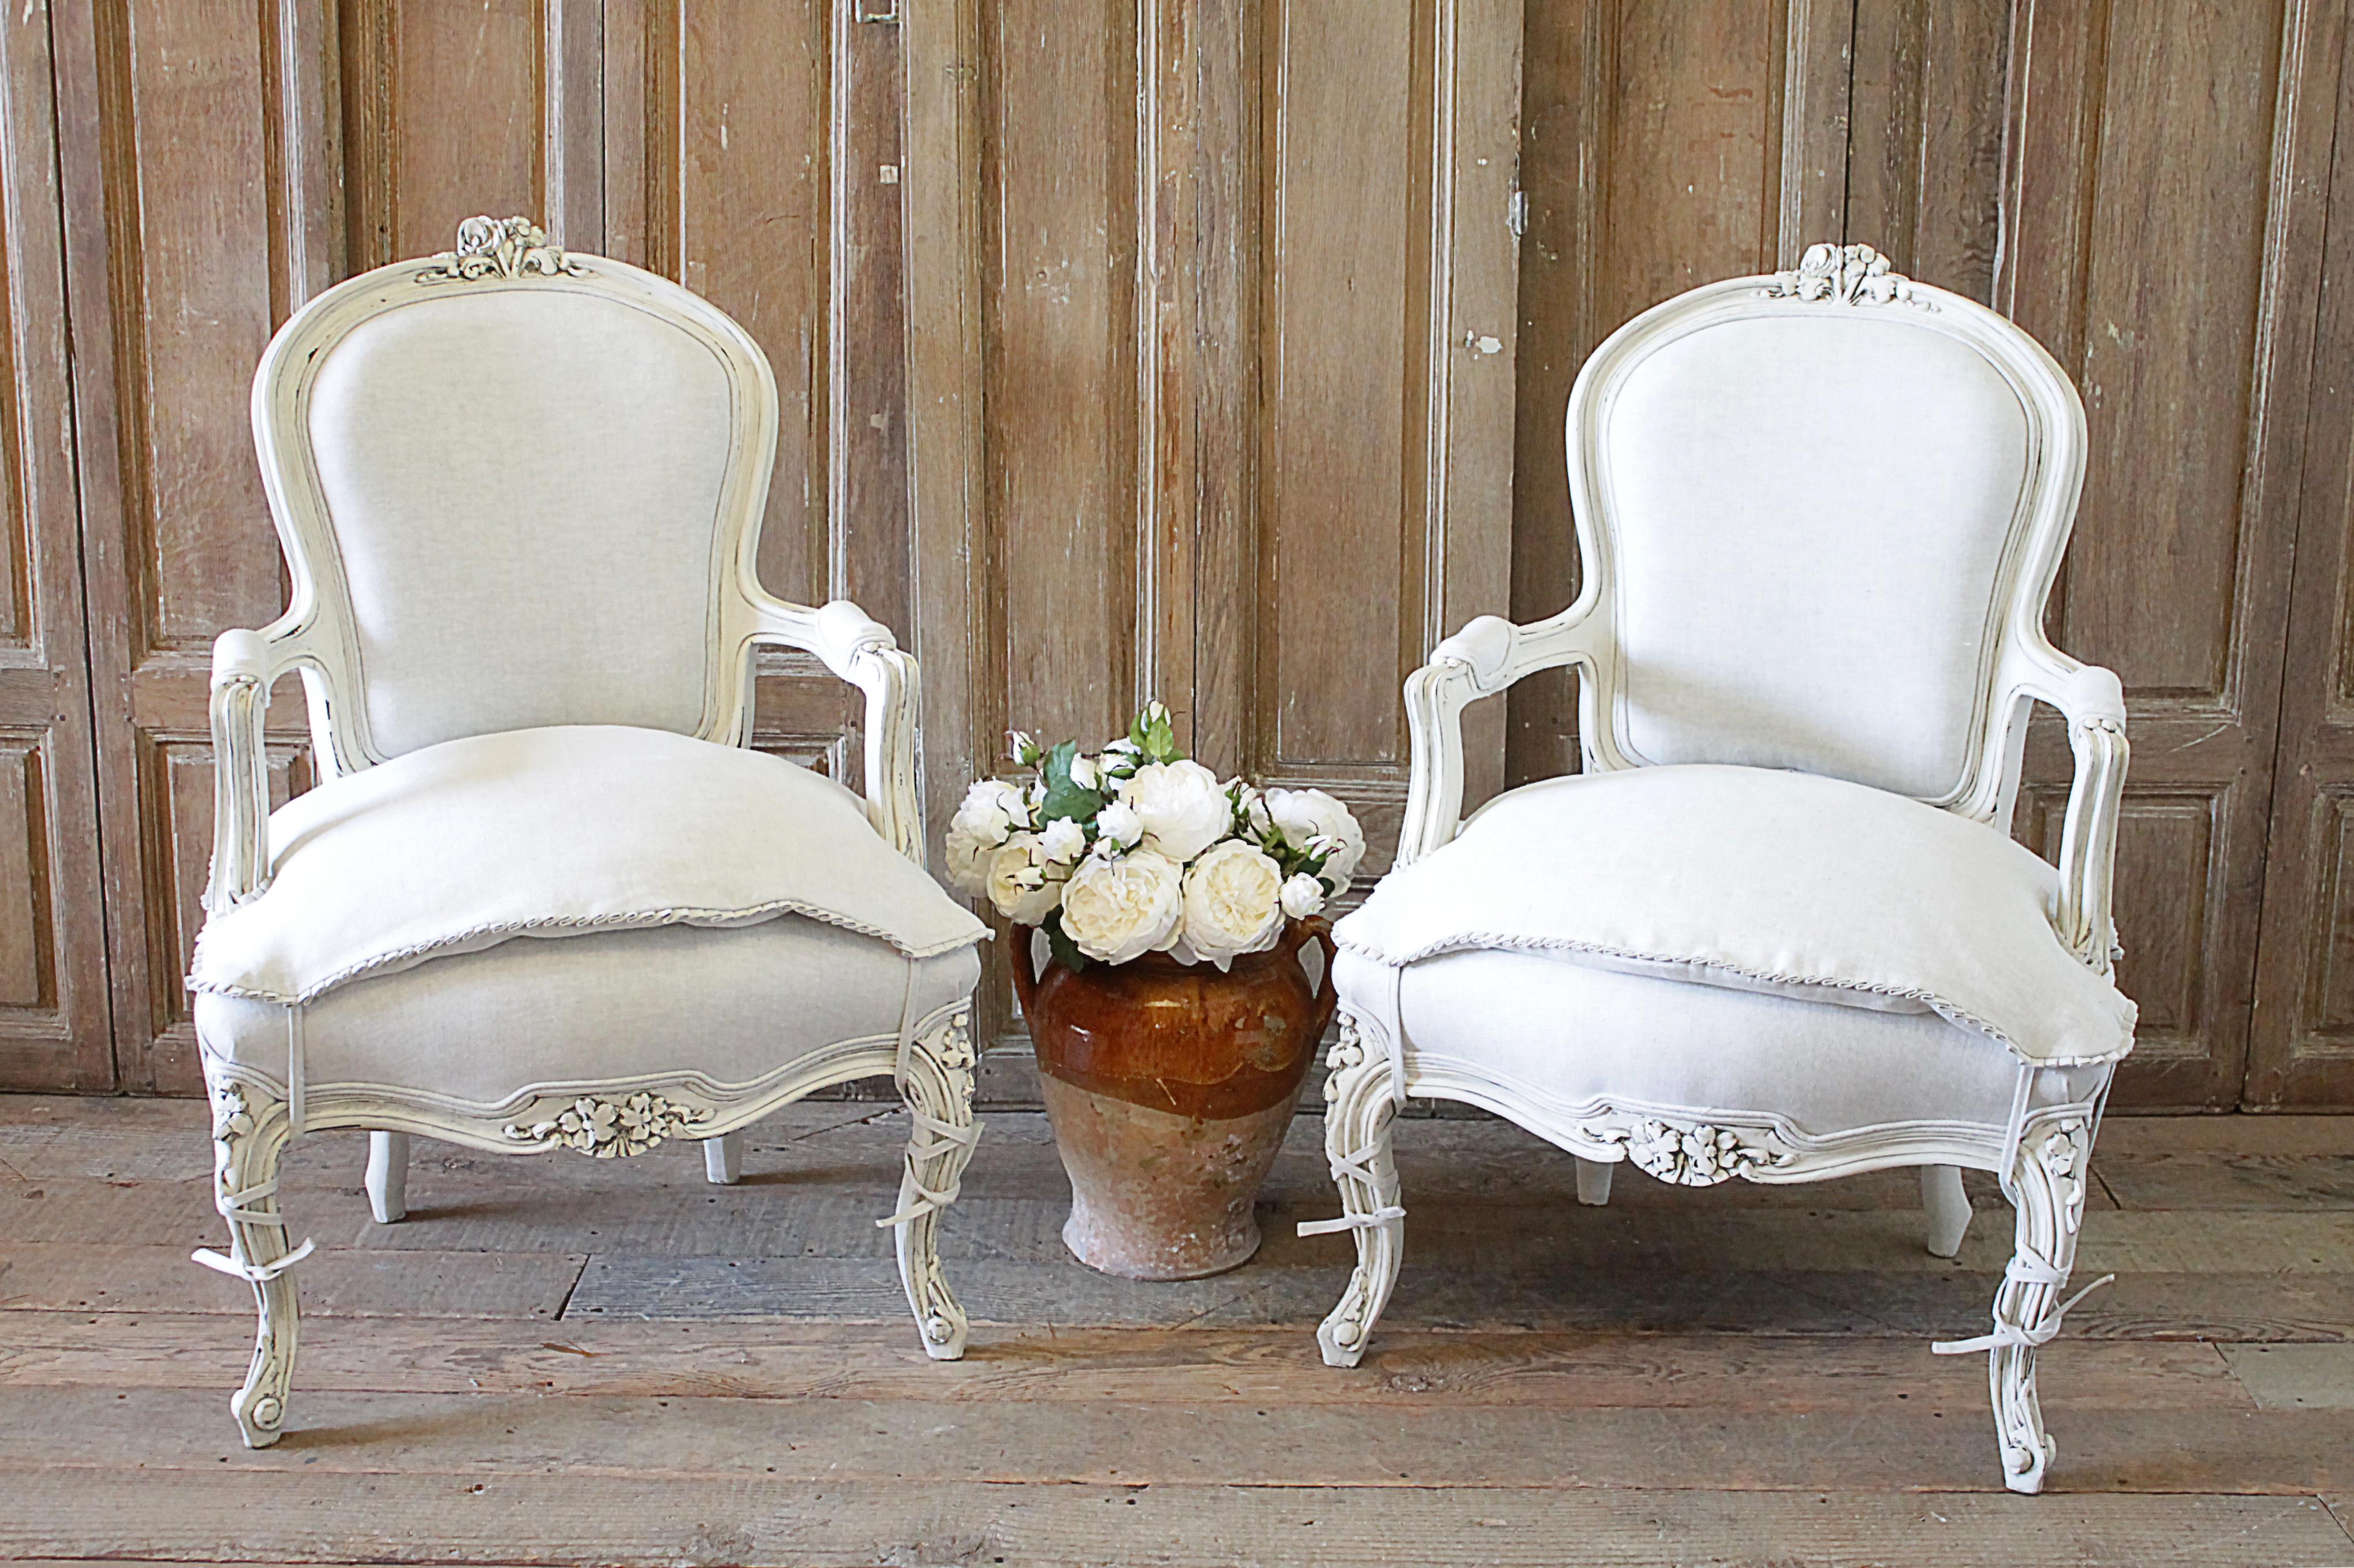 20th century pair of painted and upholstered Louis XV style open armchairs . Beautiful pair of painted chairs in our oyster white finish, with subtle distressed edges, and finished with an antique glazed patina. Classic Louis XV style. Reupholstered